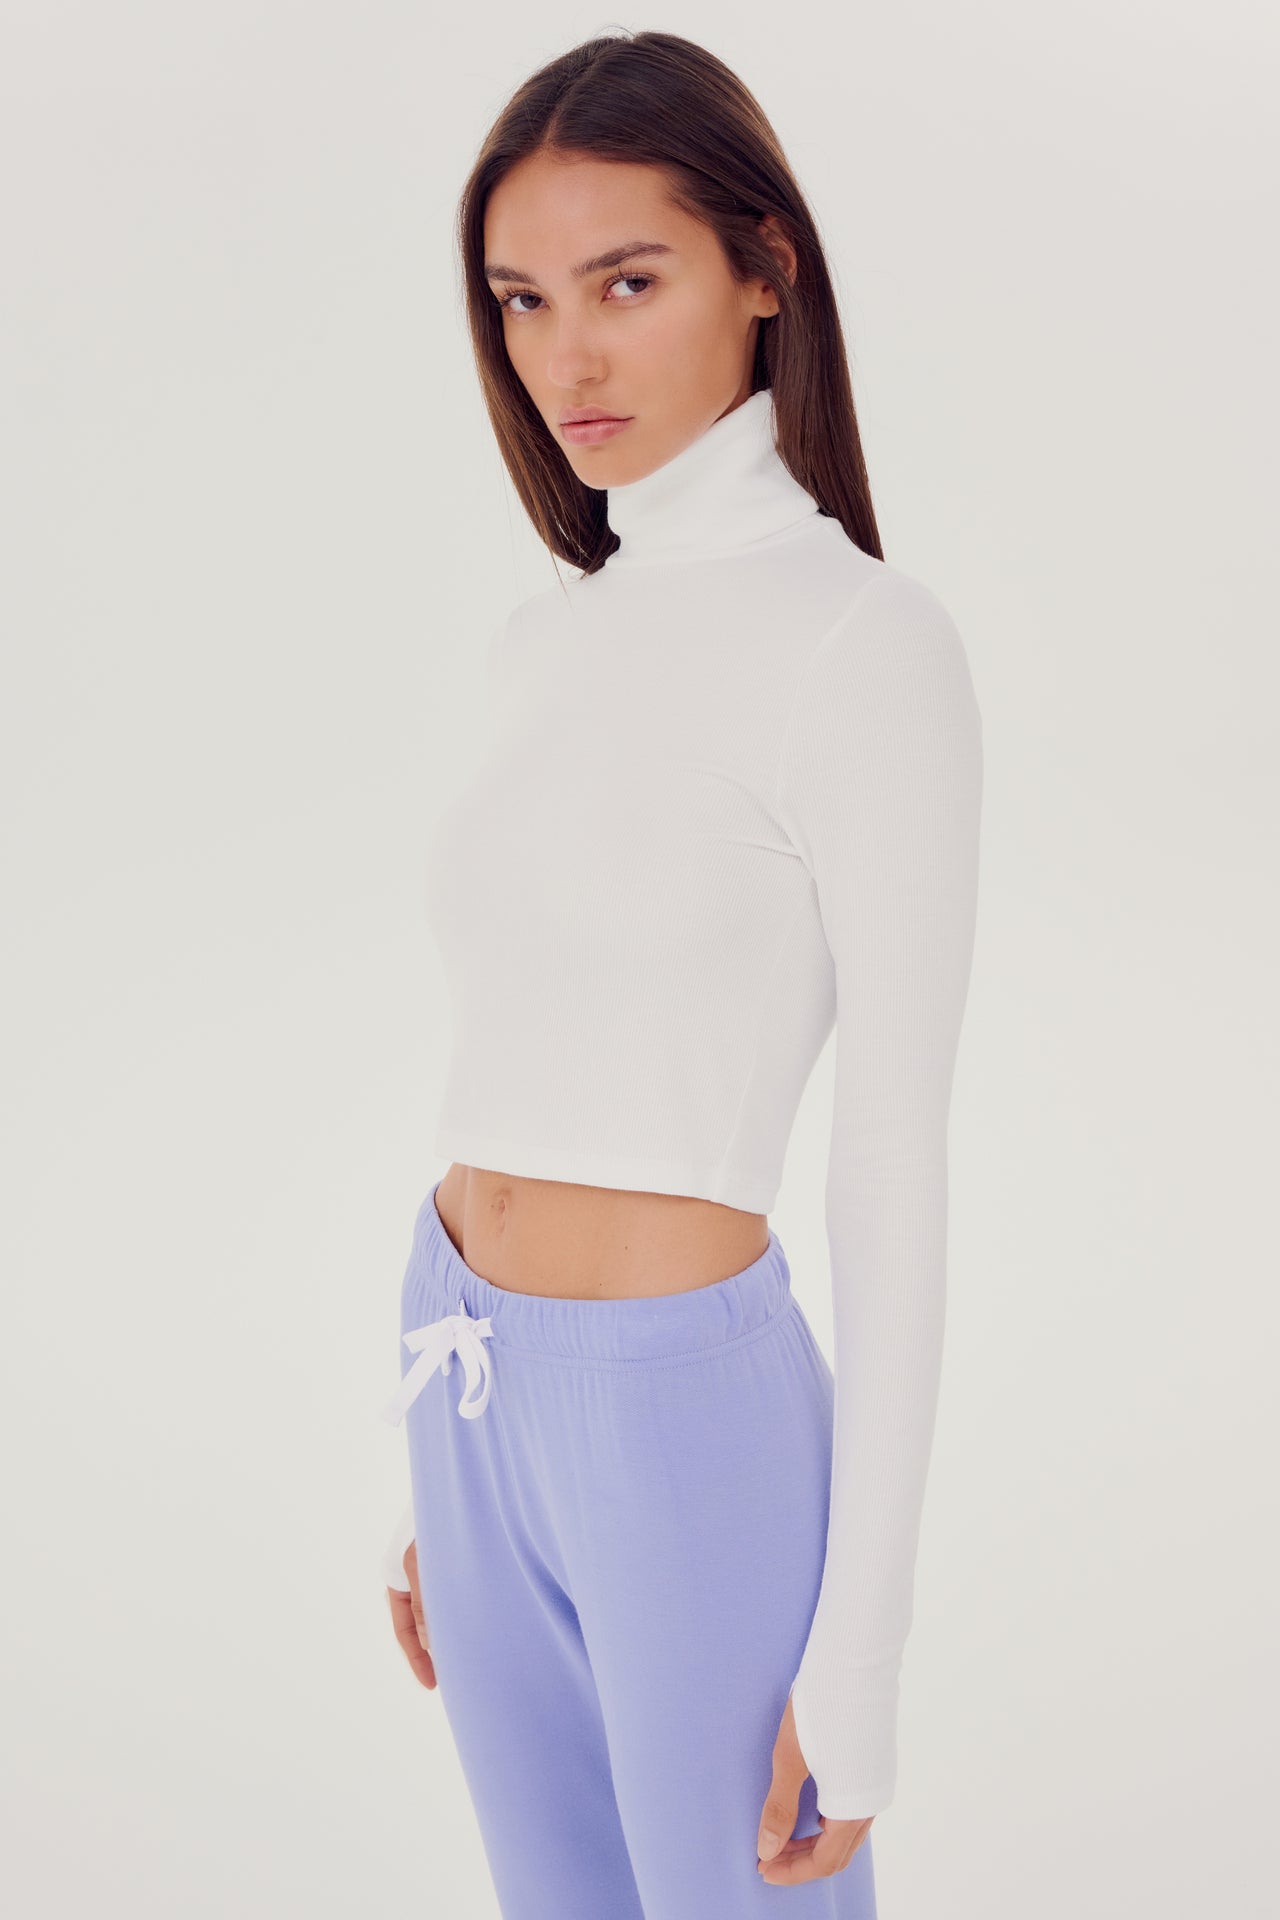 The model is wearing a white SPLITS59 Jackson Rib Cropped Turtleneck top and purple high waist leggings.